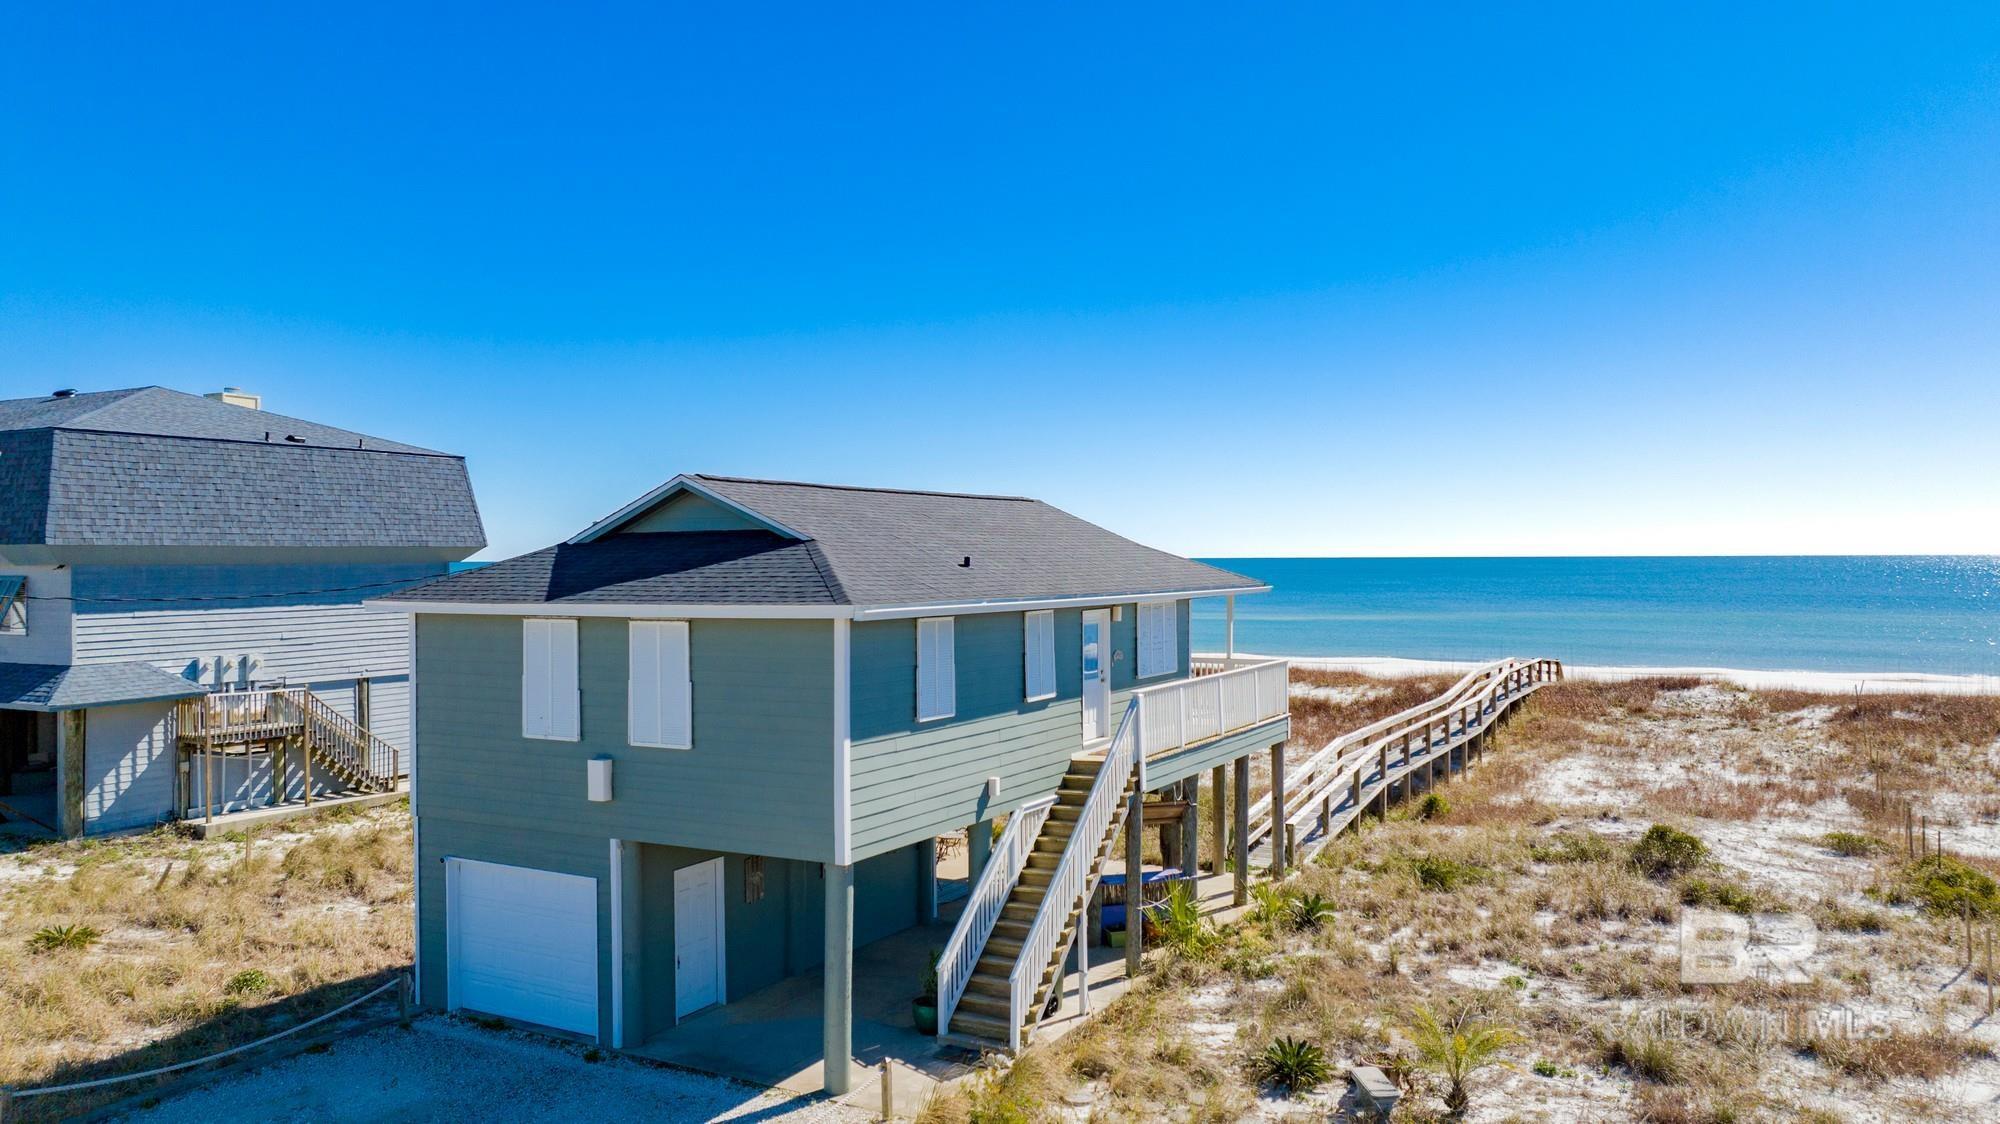 INVESTOR ALERT !  This 100 feet on the Gulf offers a rare opportunity to take advantage of its HIGH DENSITY ZONING TO DESIGN/BUILD UP TO 12 DIRECT GULF FRONT LUXURY RESIDENCES in an area of extreme low density. With almost no new properties currently being offered on Perdido Key, the demand potential goes without saying.  Built in 2008, the existing beach cottage is picture perfect and in excellent condition, able to act as a Sales & Development Center if desired, or simply enjoy as a low maintenance, high value "Retreat" for the family. With  a very limited number of properly zoned properties and even fewer permits being allocated, such opportunities are fast disappearing on Perdido Key. Even as a stand-alone property, this Gulf-front residence will provide excellent quality time for your family on an uncrowded Gulf beach and continue to grow in value over time.